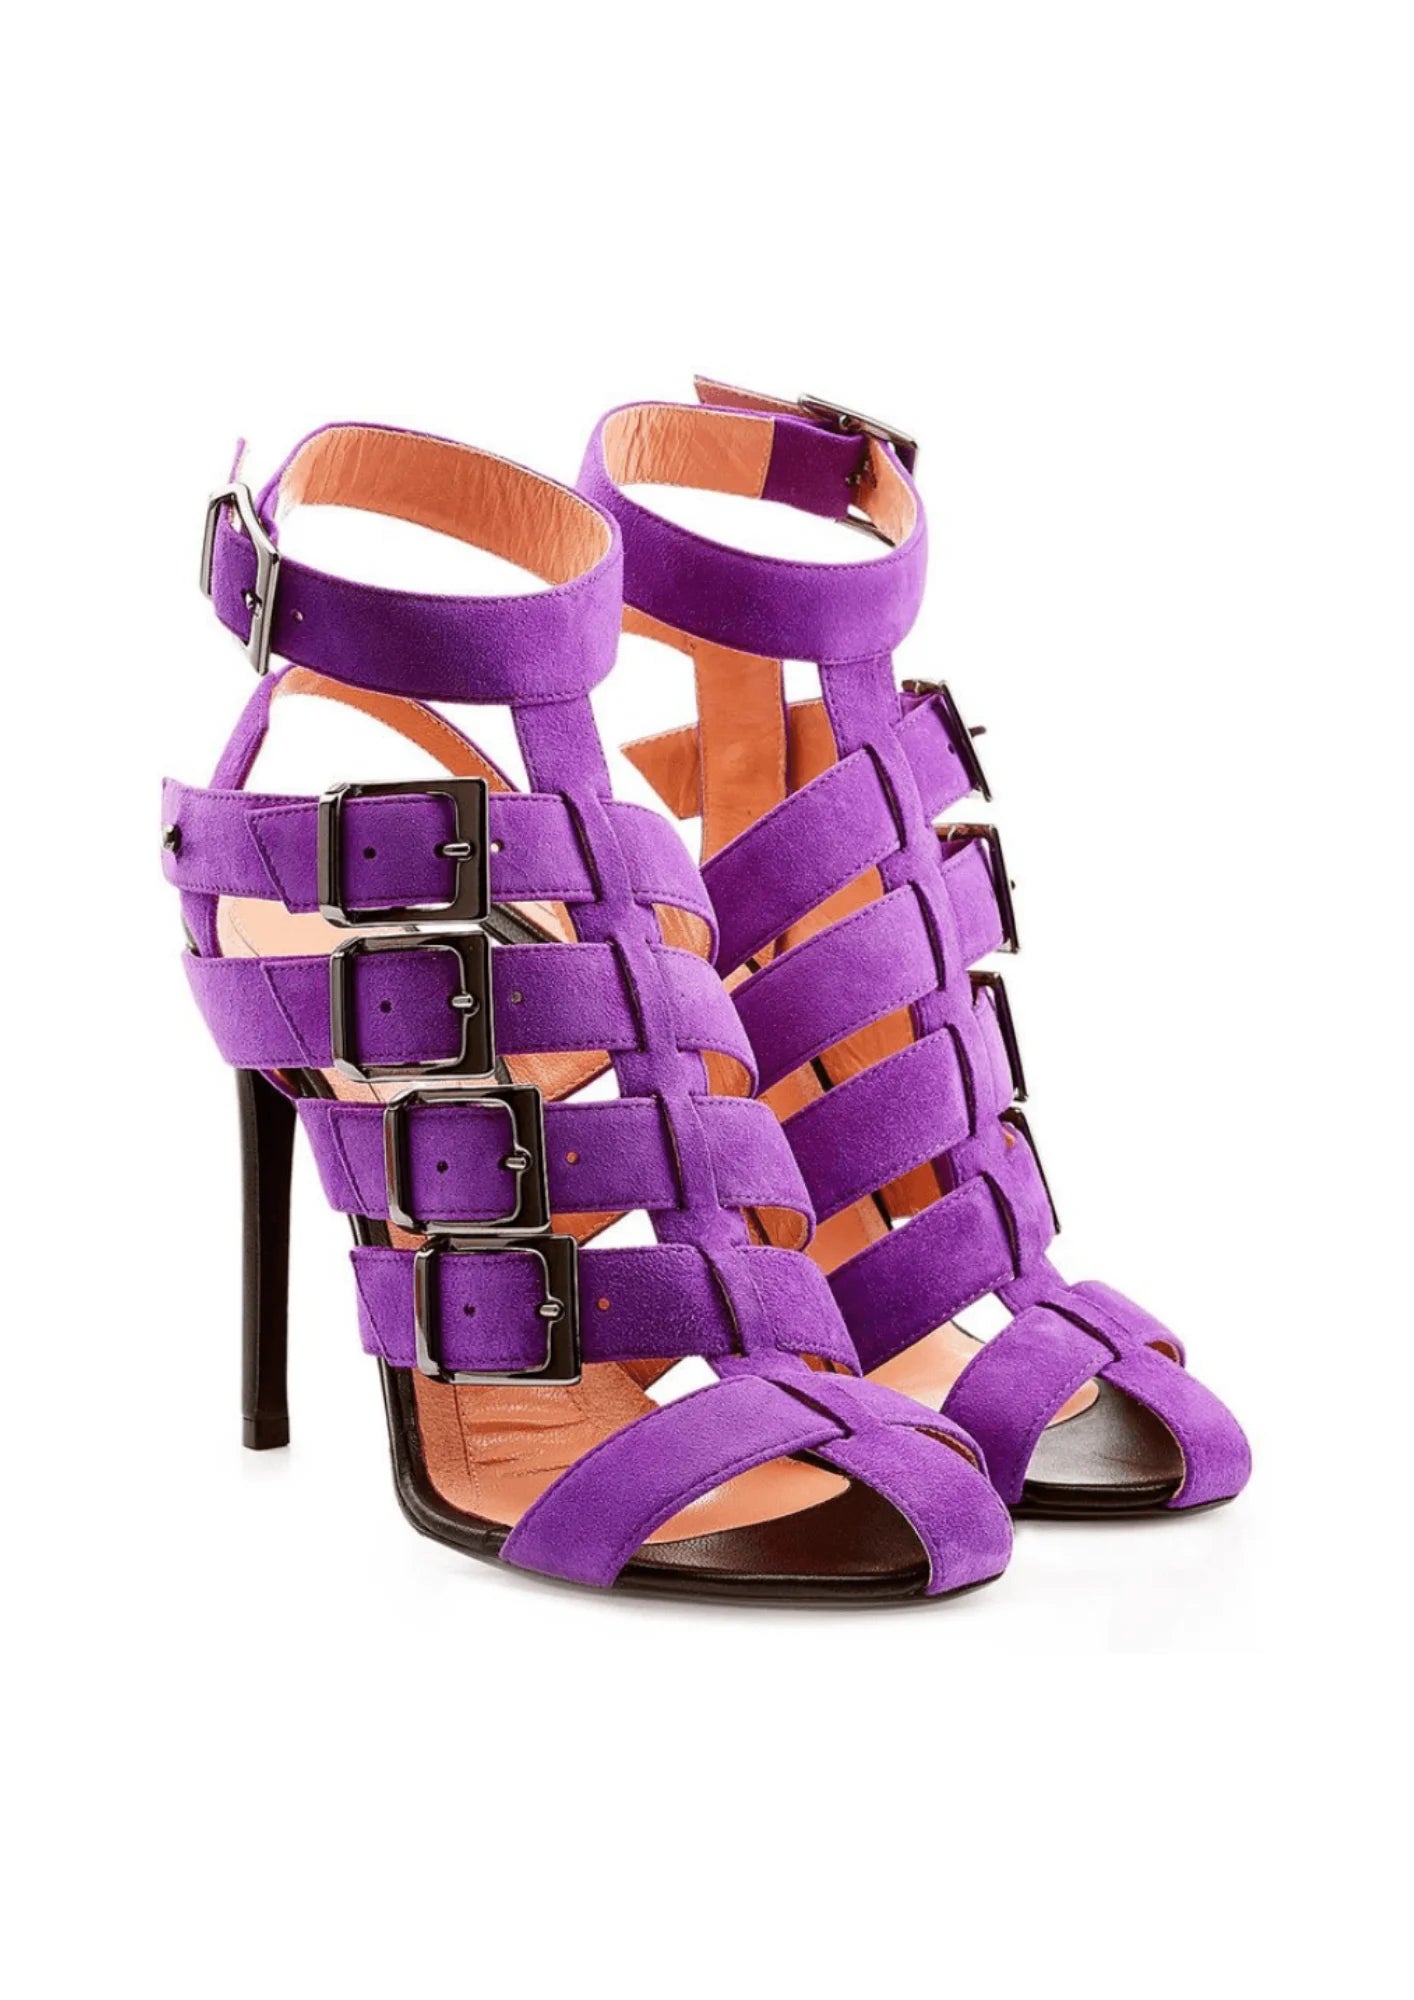 PURPLE HIGH HEELS WITH STRAPS